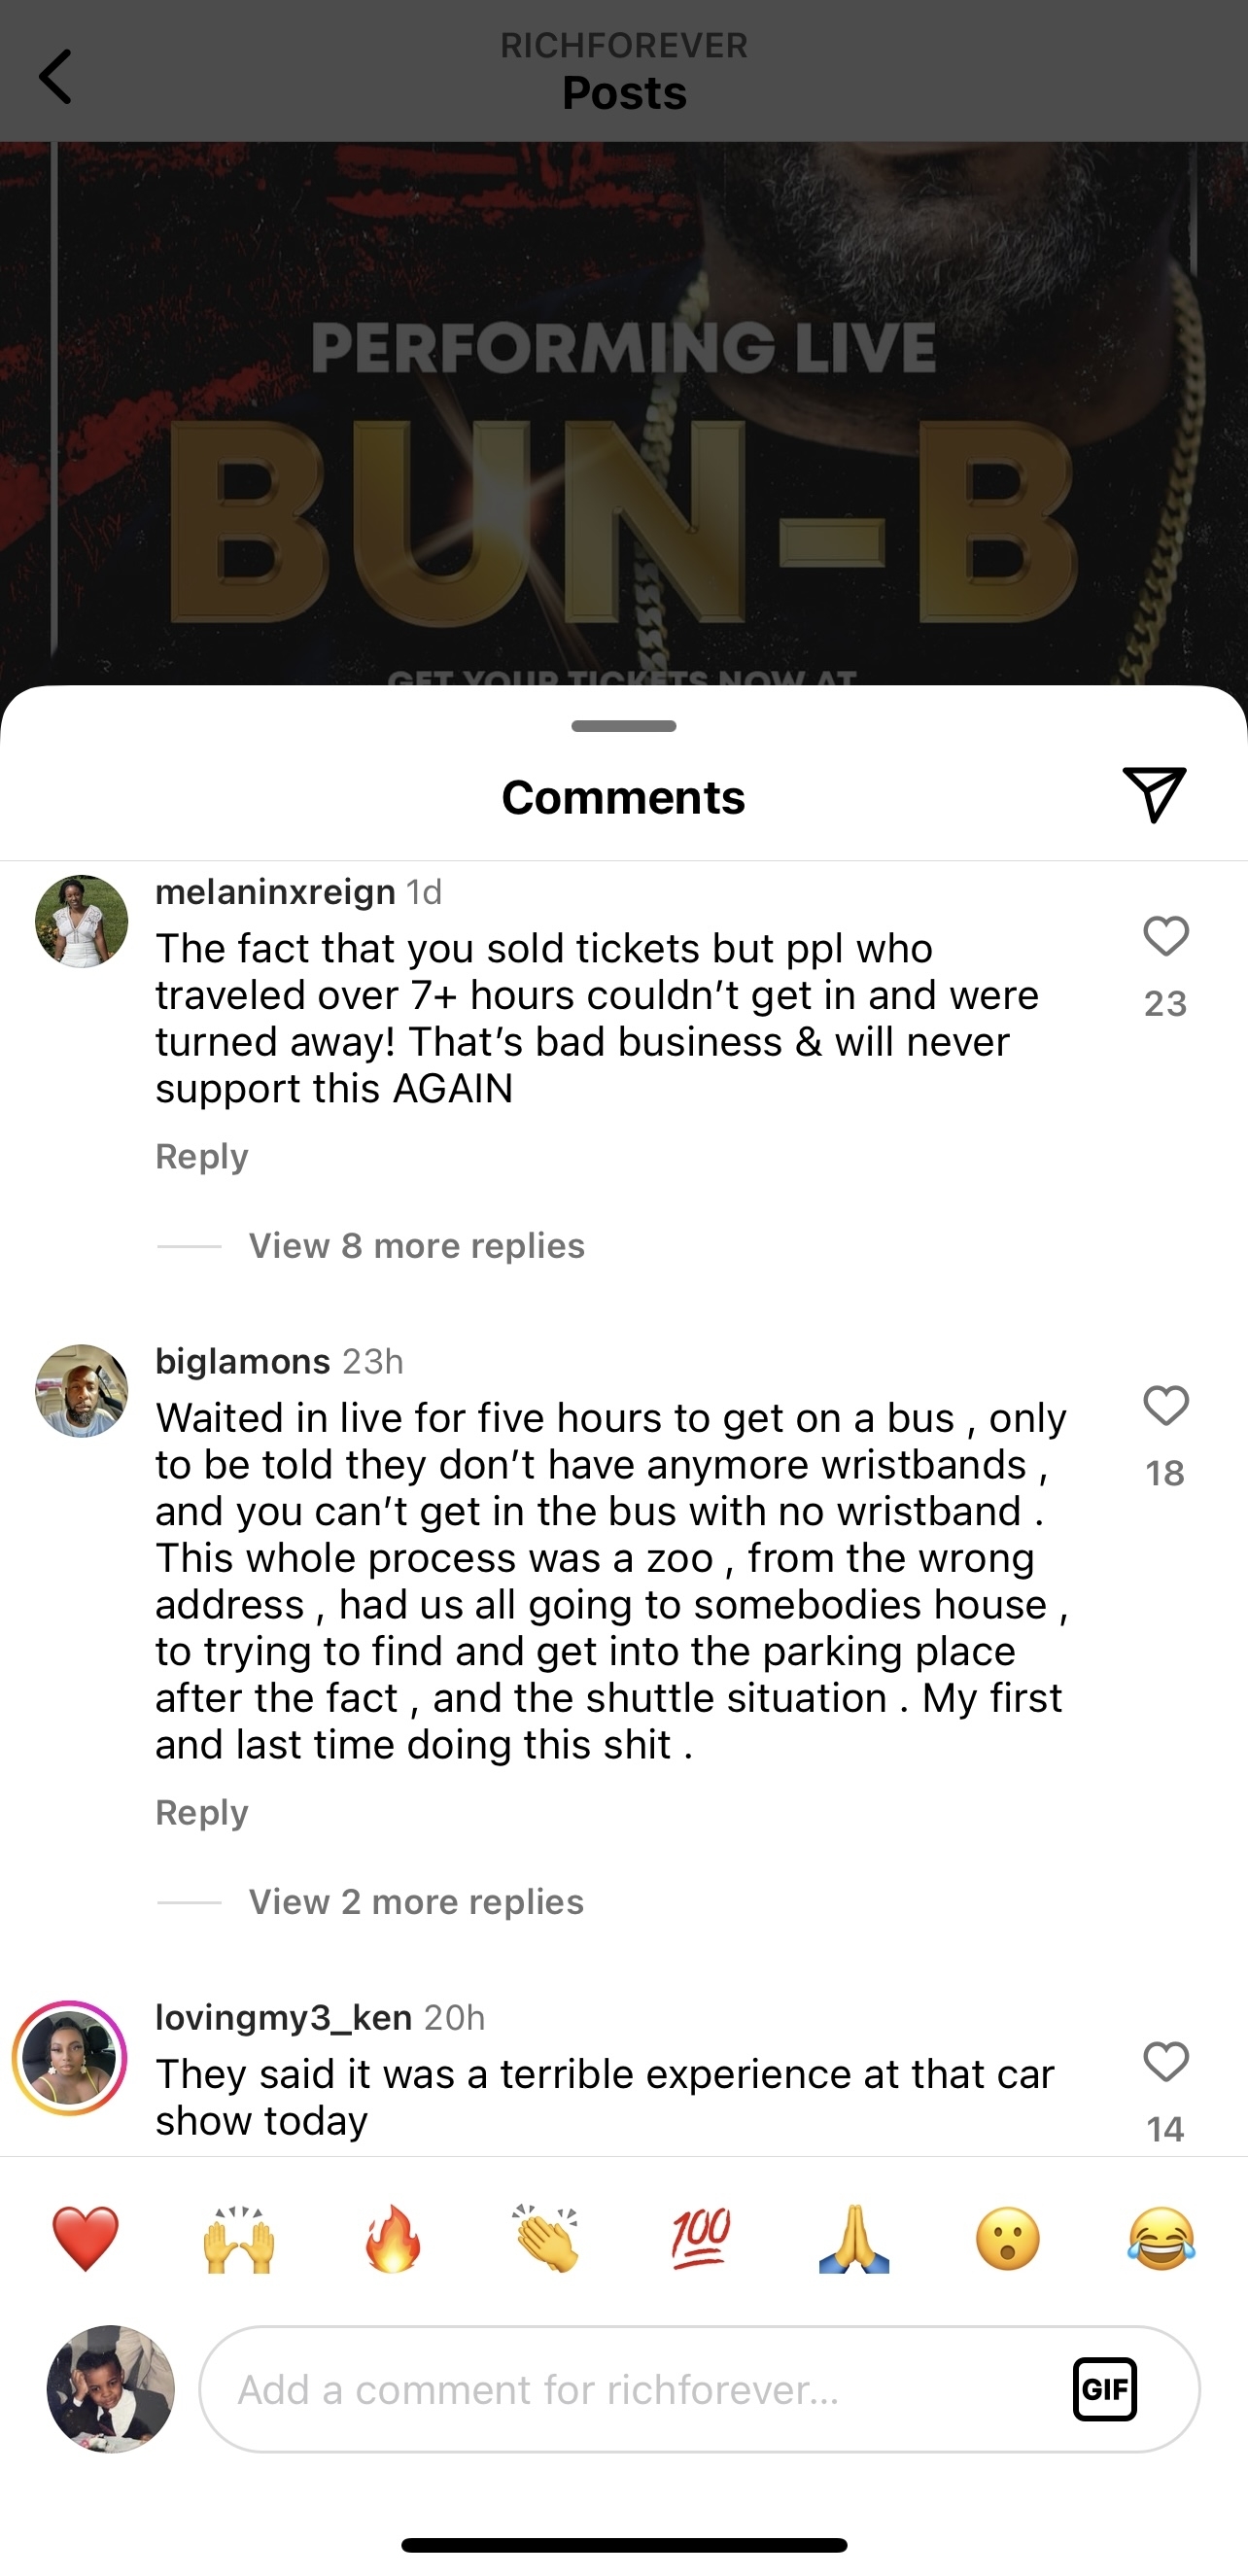 Instagram post by RICHFOREVER featuring comments about a Bun B performance. Users express frustration about ticket and wristband issues, long wait times, and disorganization